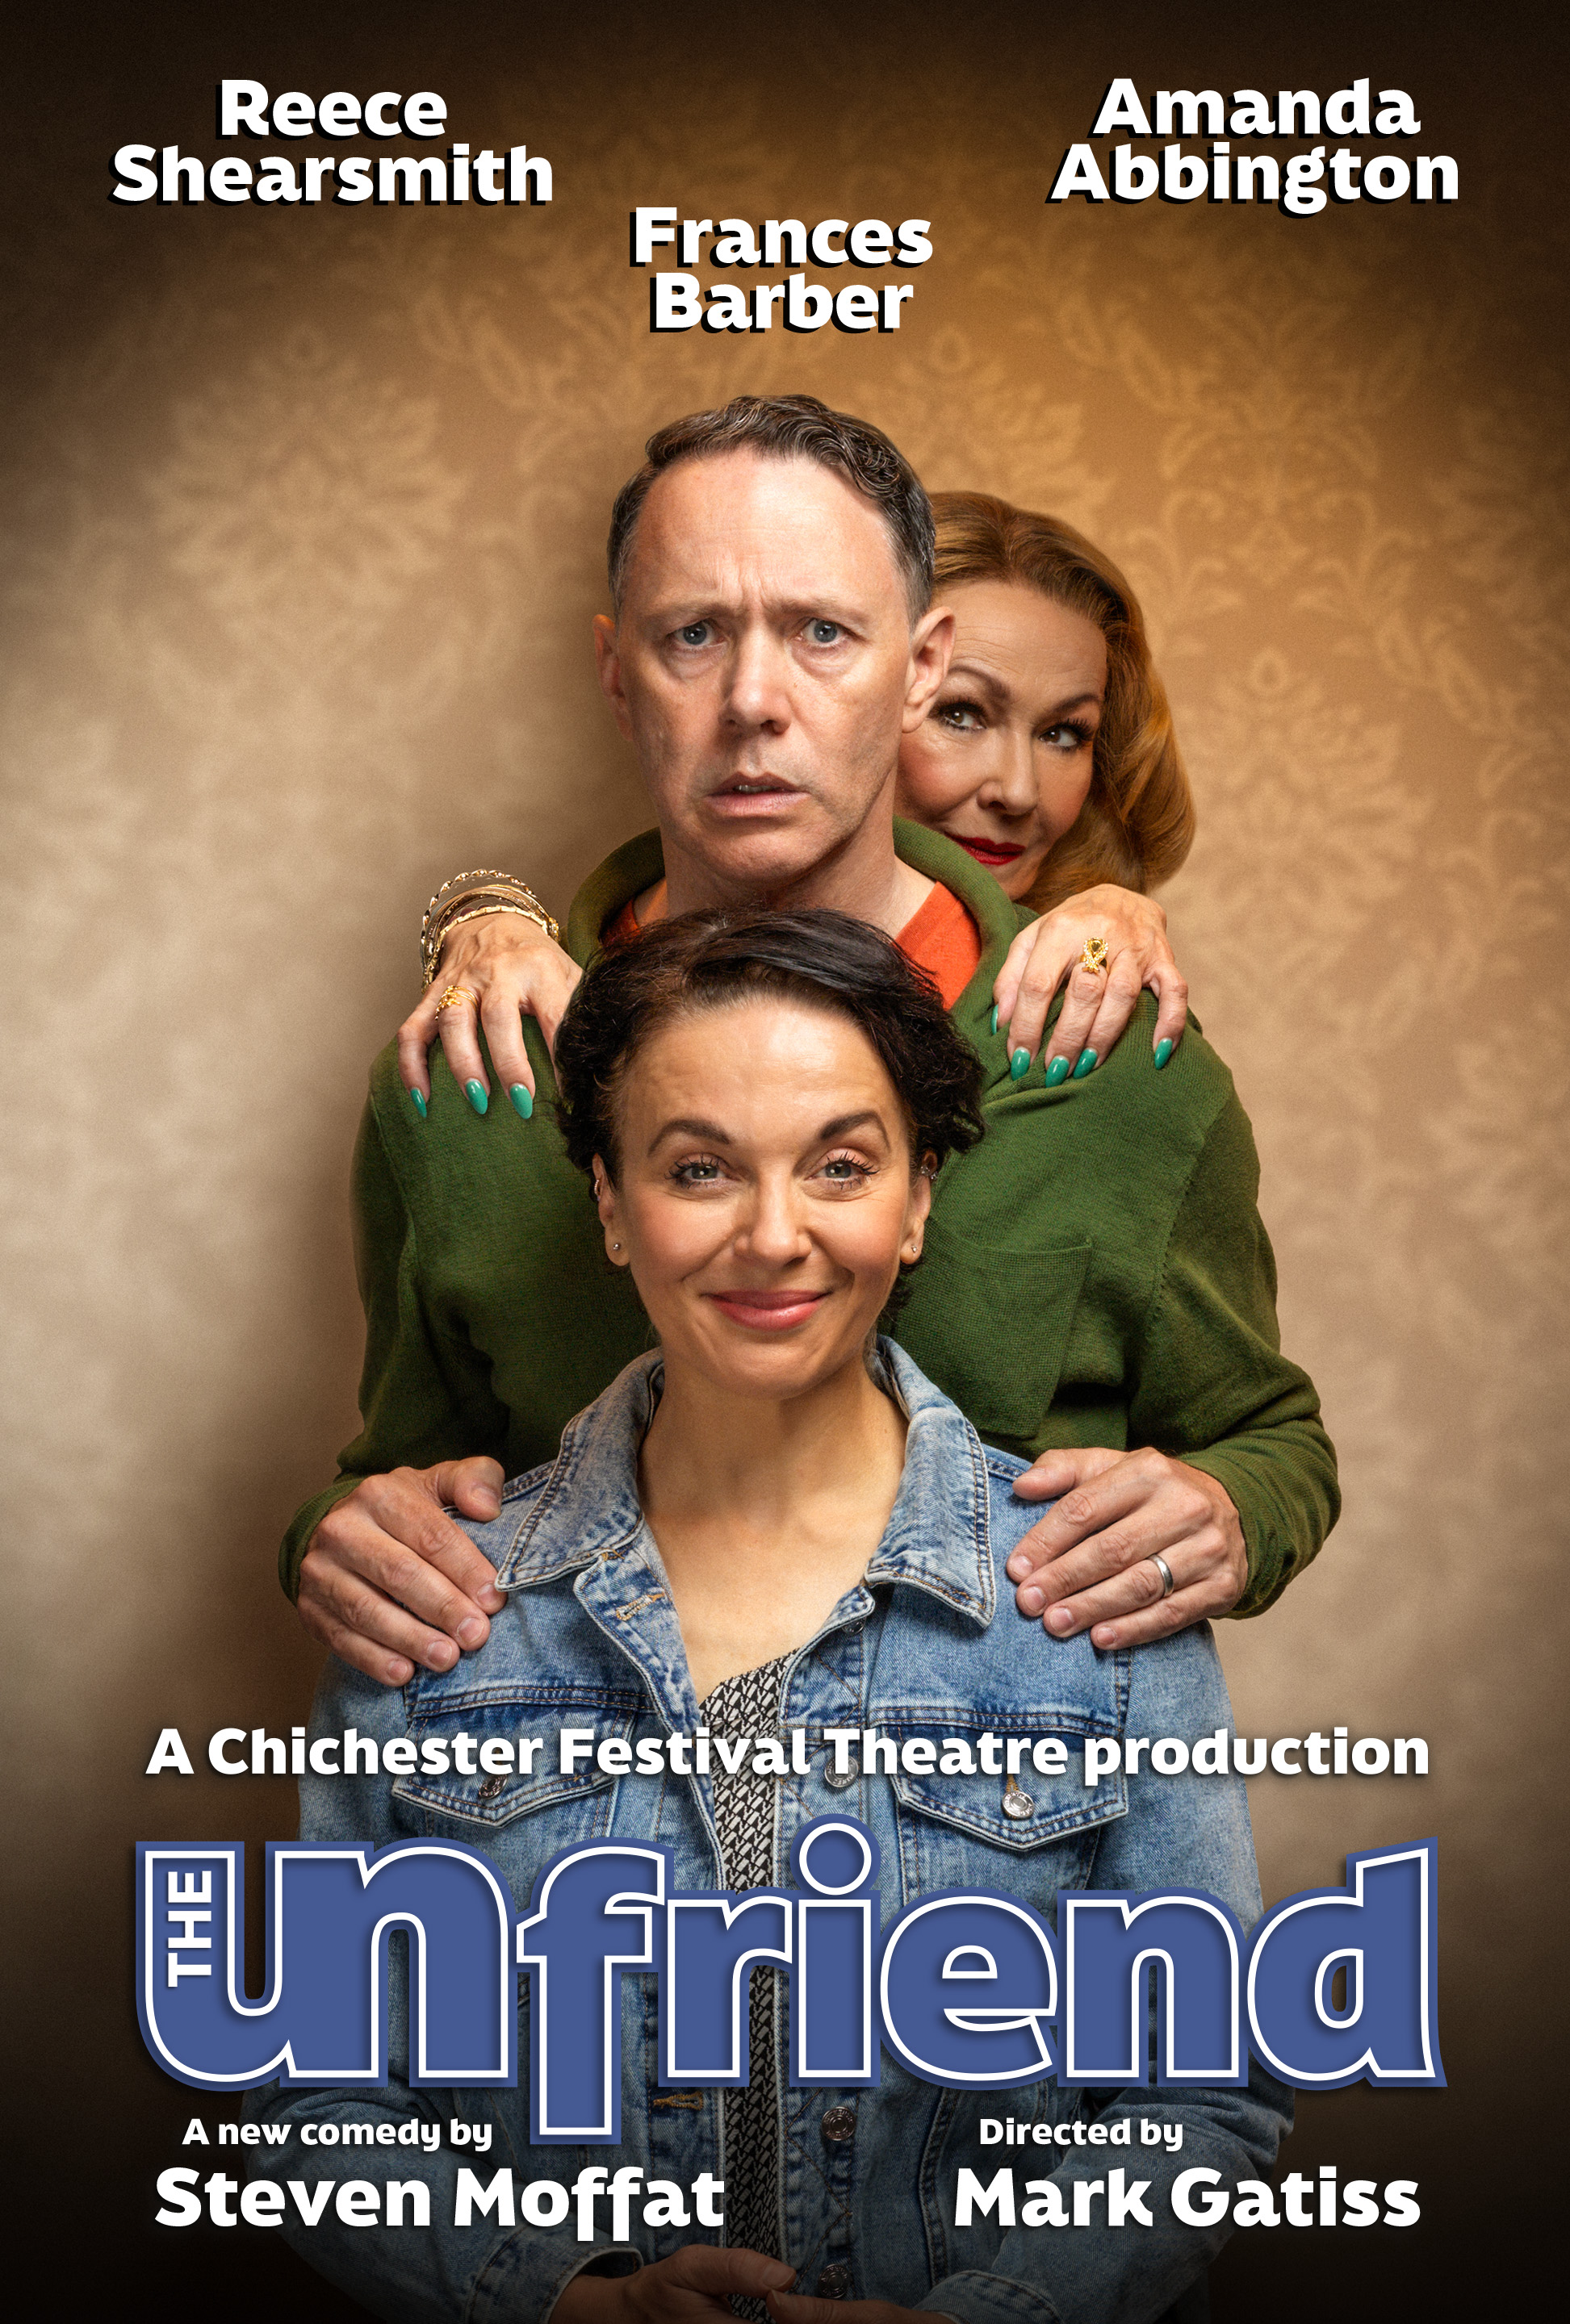 Tour Poster for the Unfriend with 3 actors to the the left and lots of 4 or 5 star reviews to the right